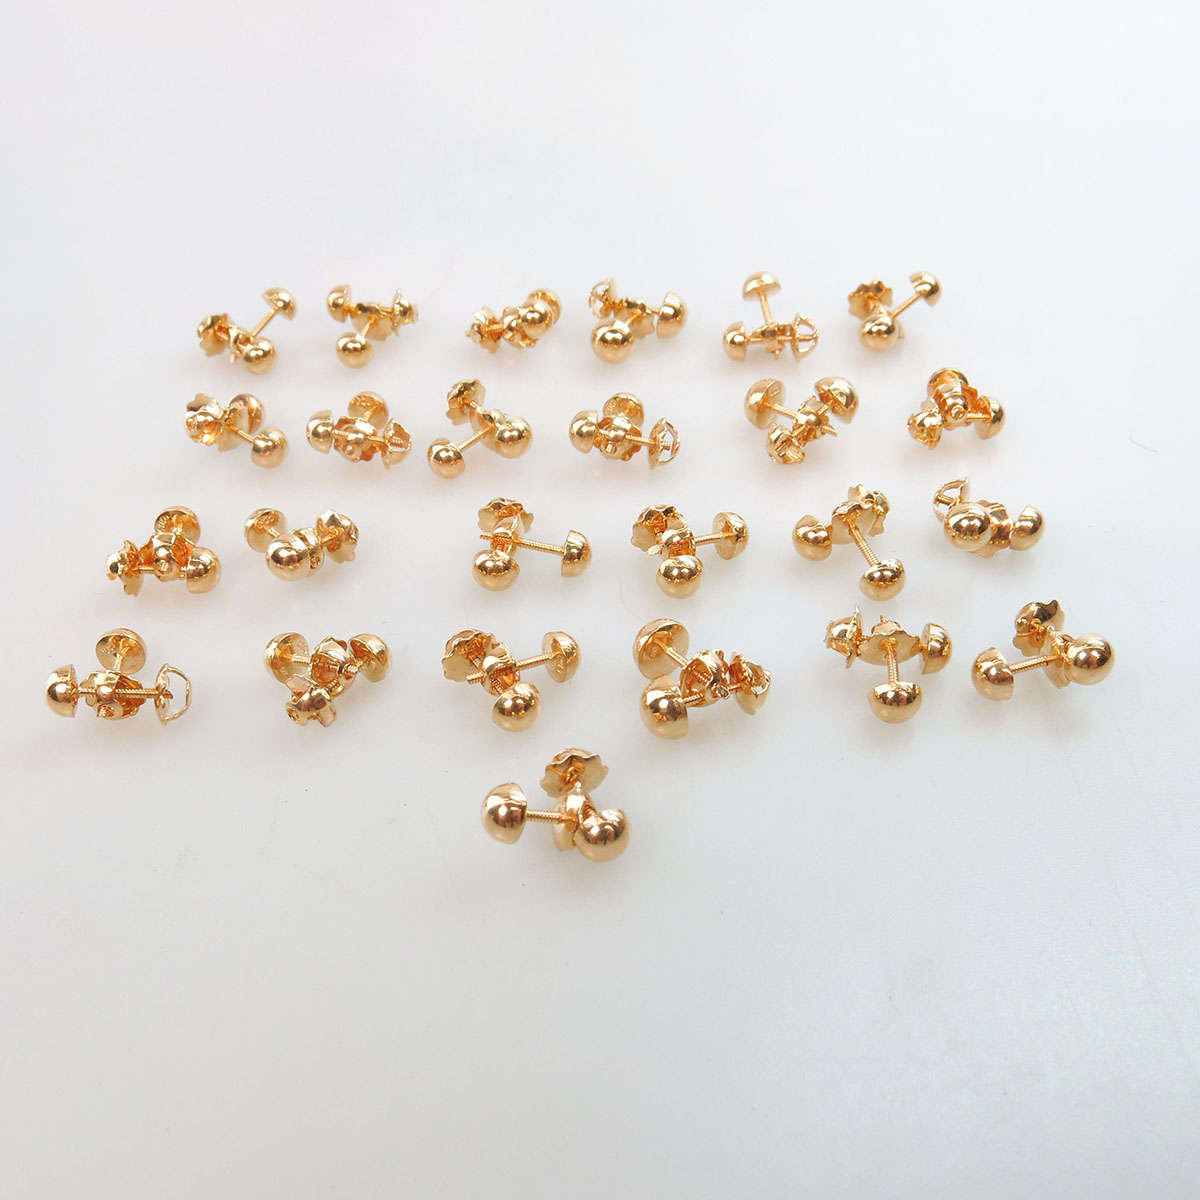 25 Pairs Of 18k Yellow Gold Stud Earrings